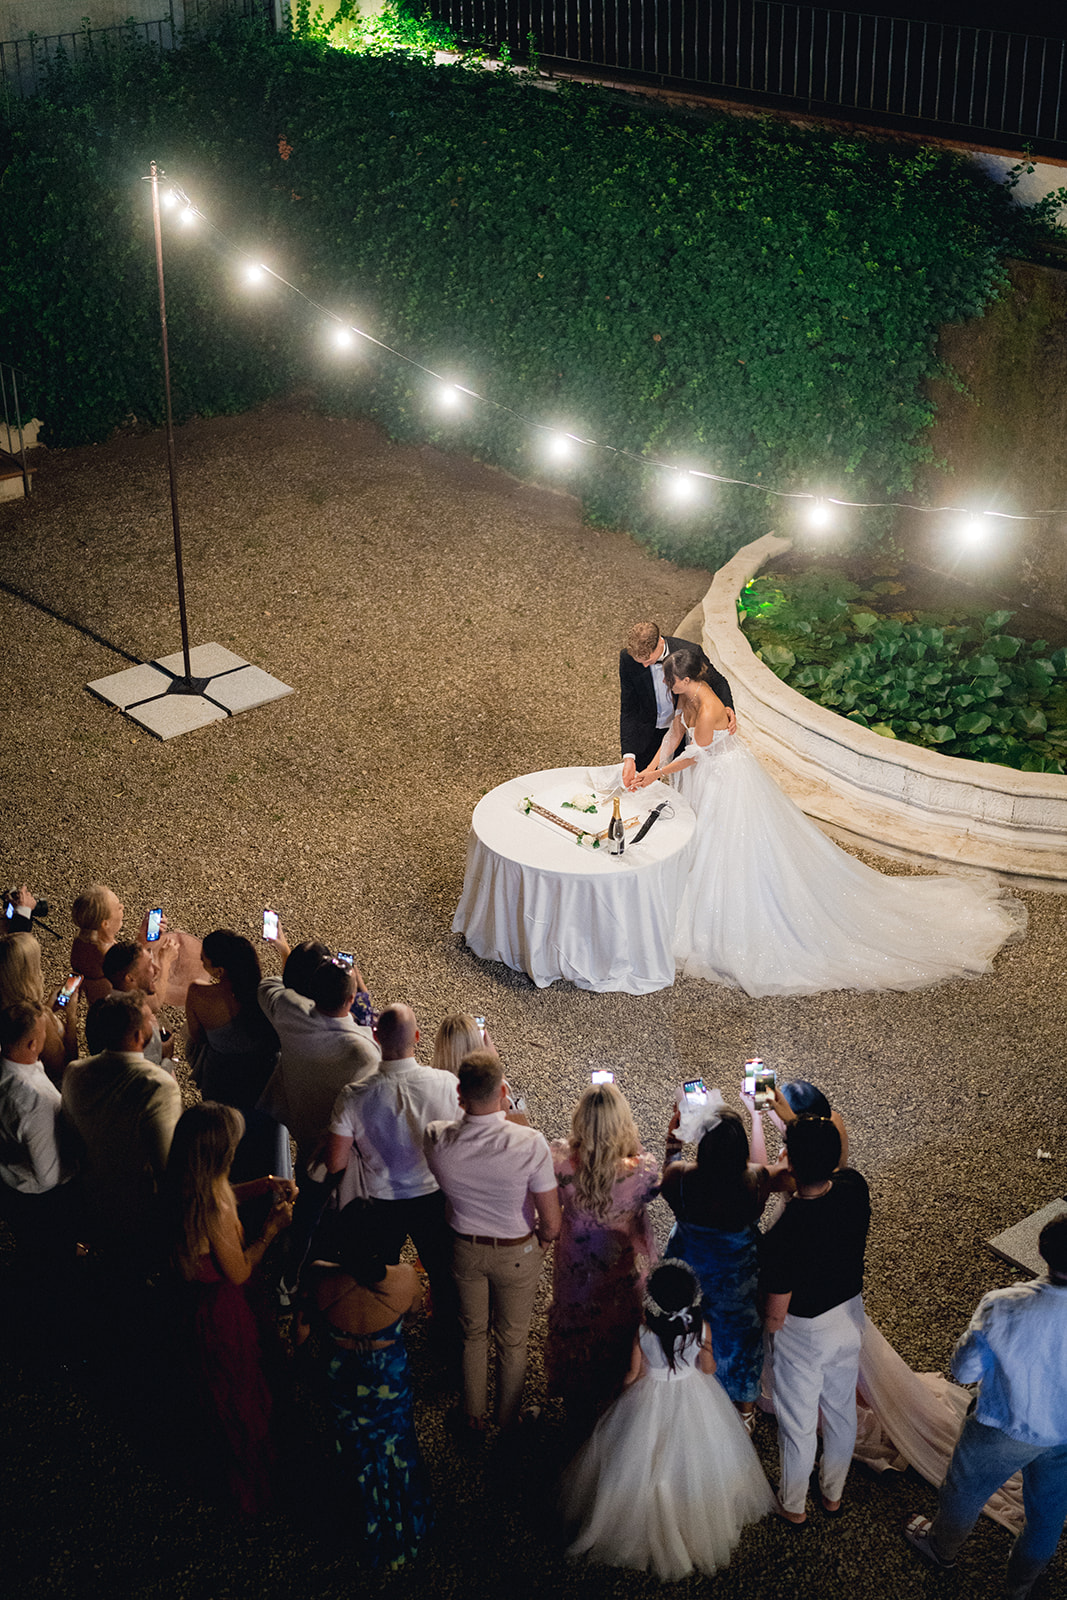 The cutting of the wedding cake by the newlyweds, seen from above